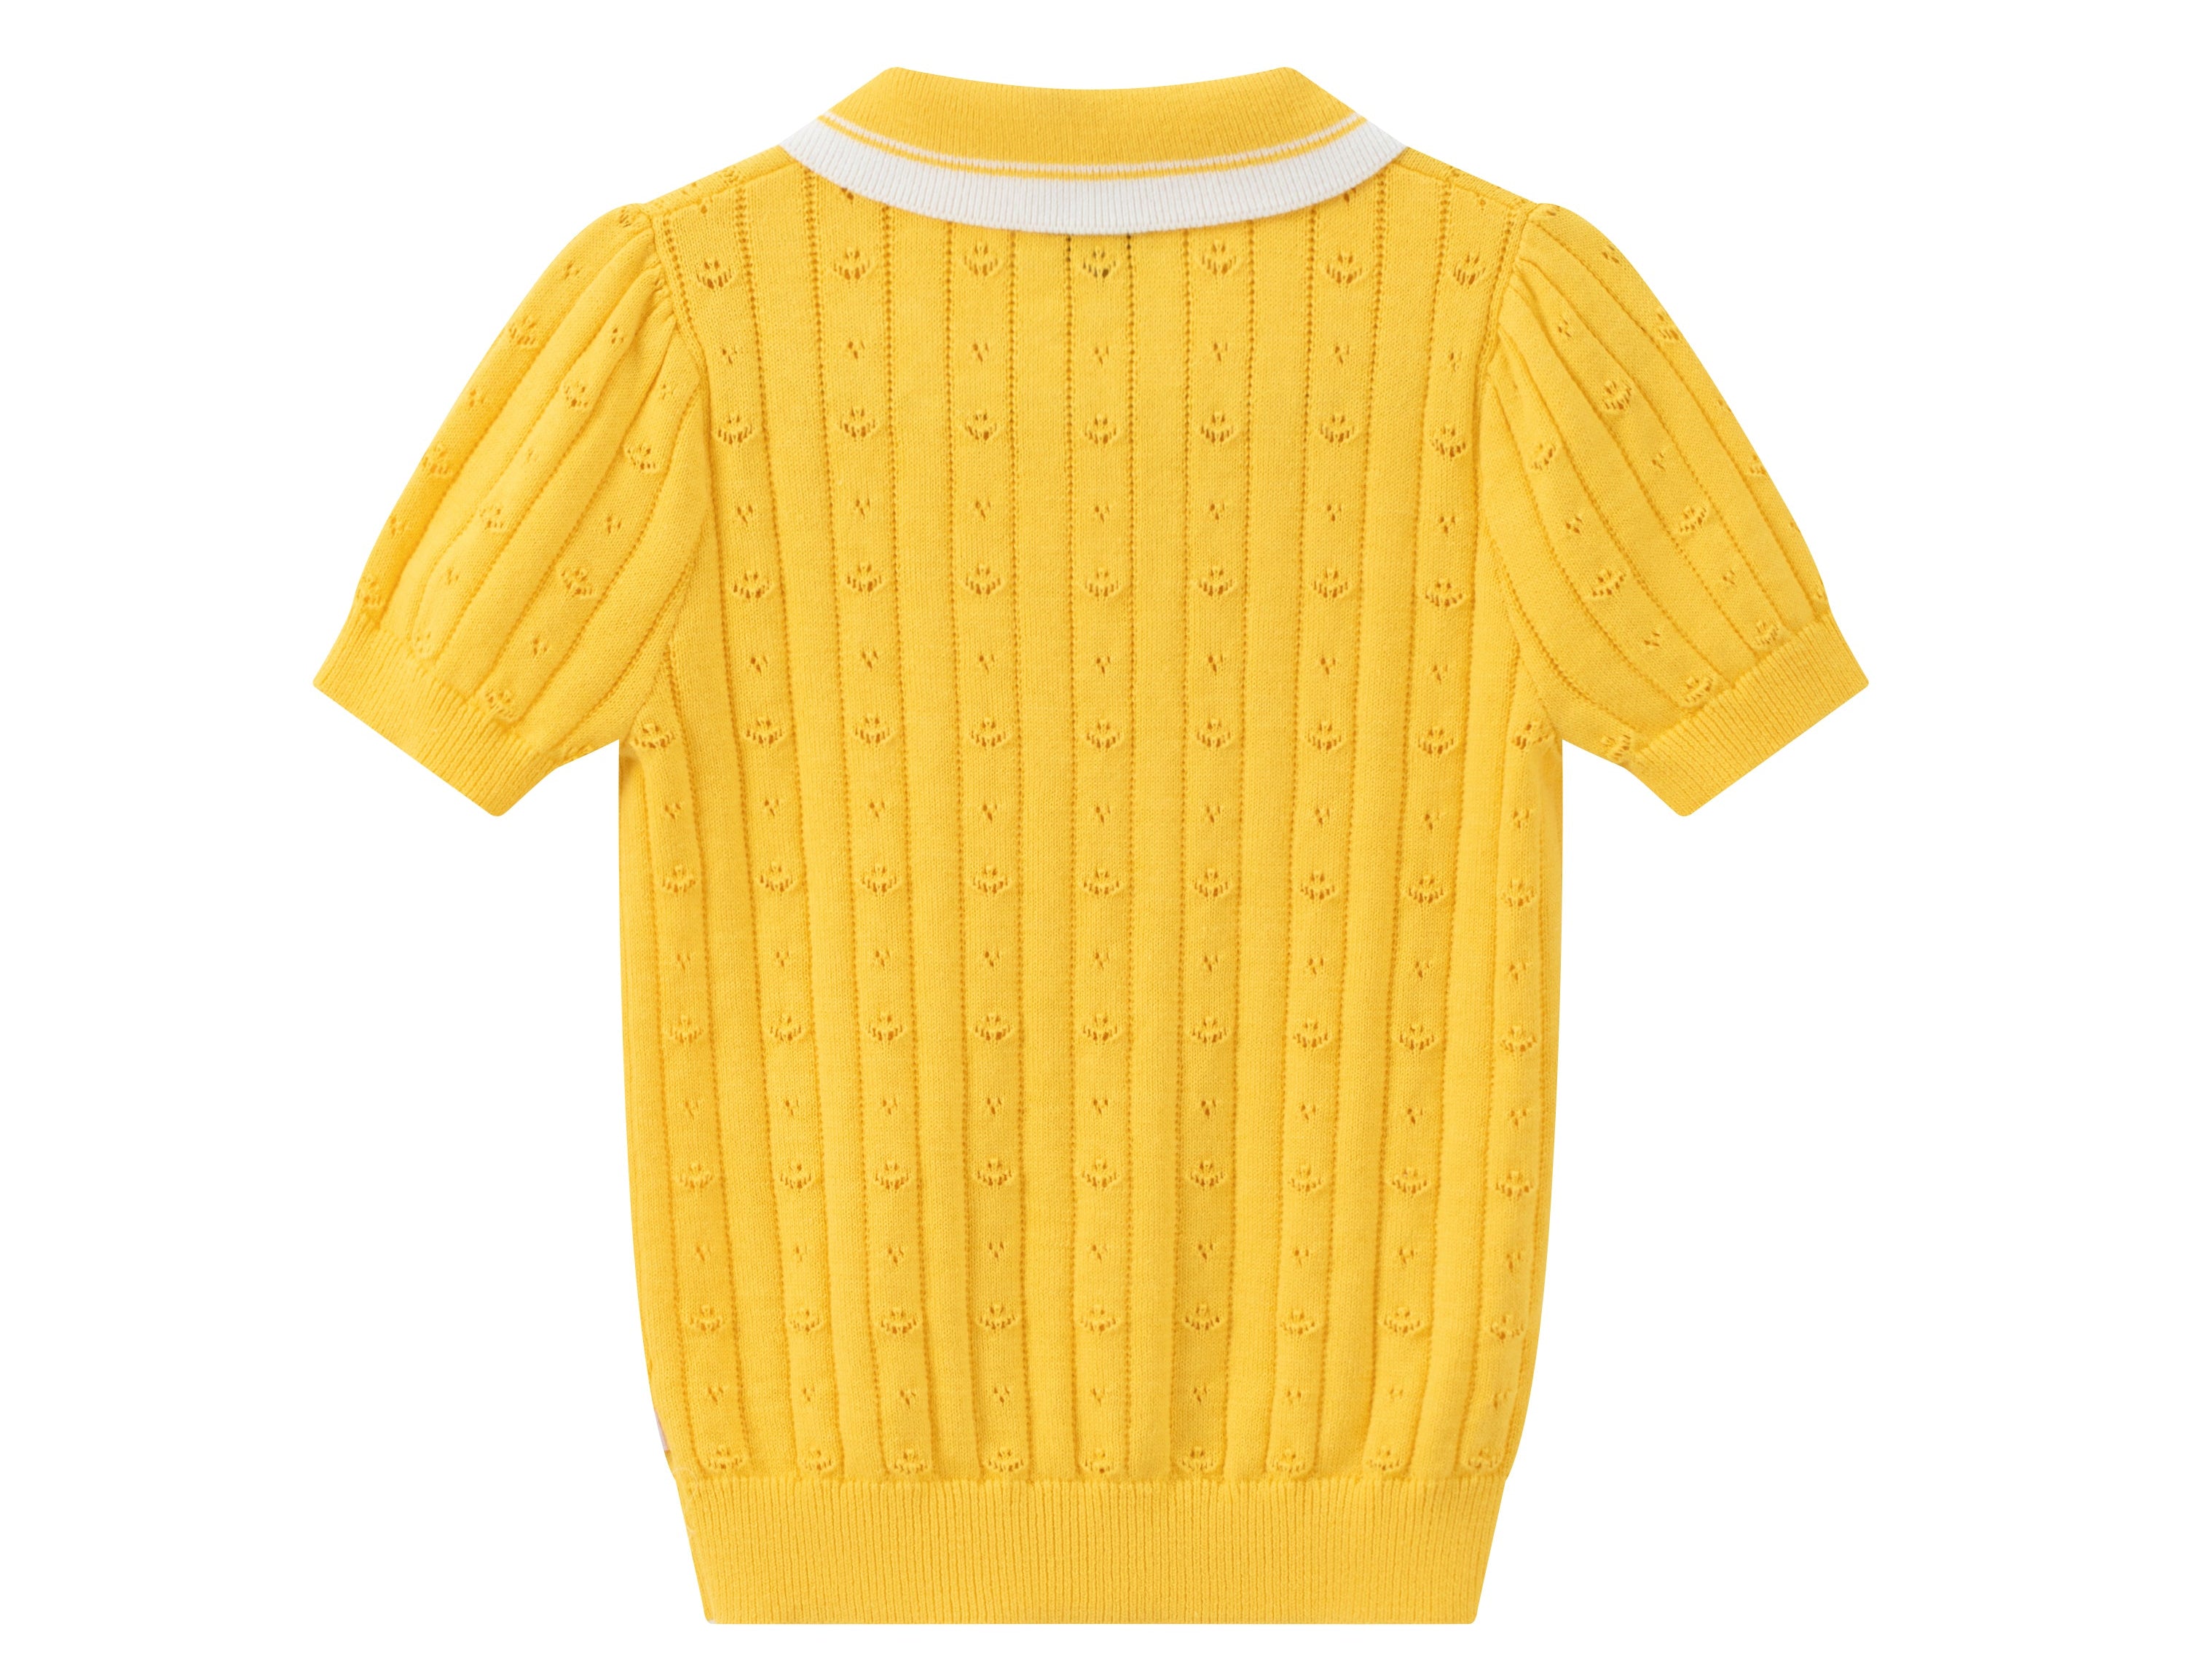 Vauva SS24 - Girls Knitted Polo Sweater (Orange) - Product 2